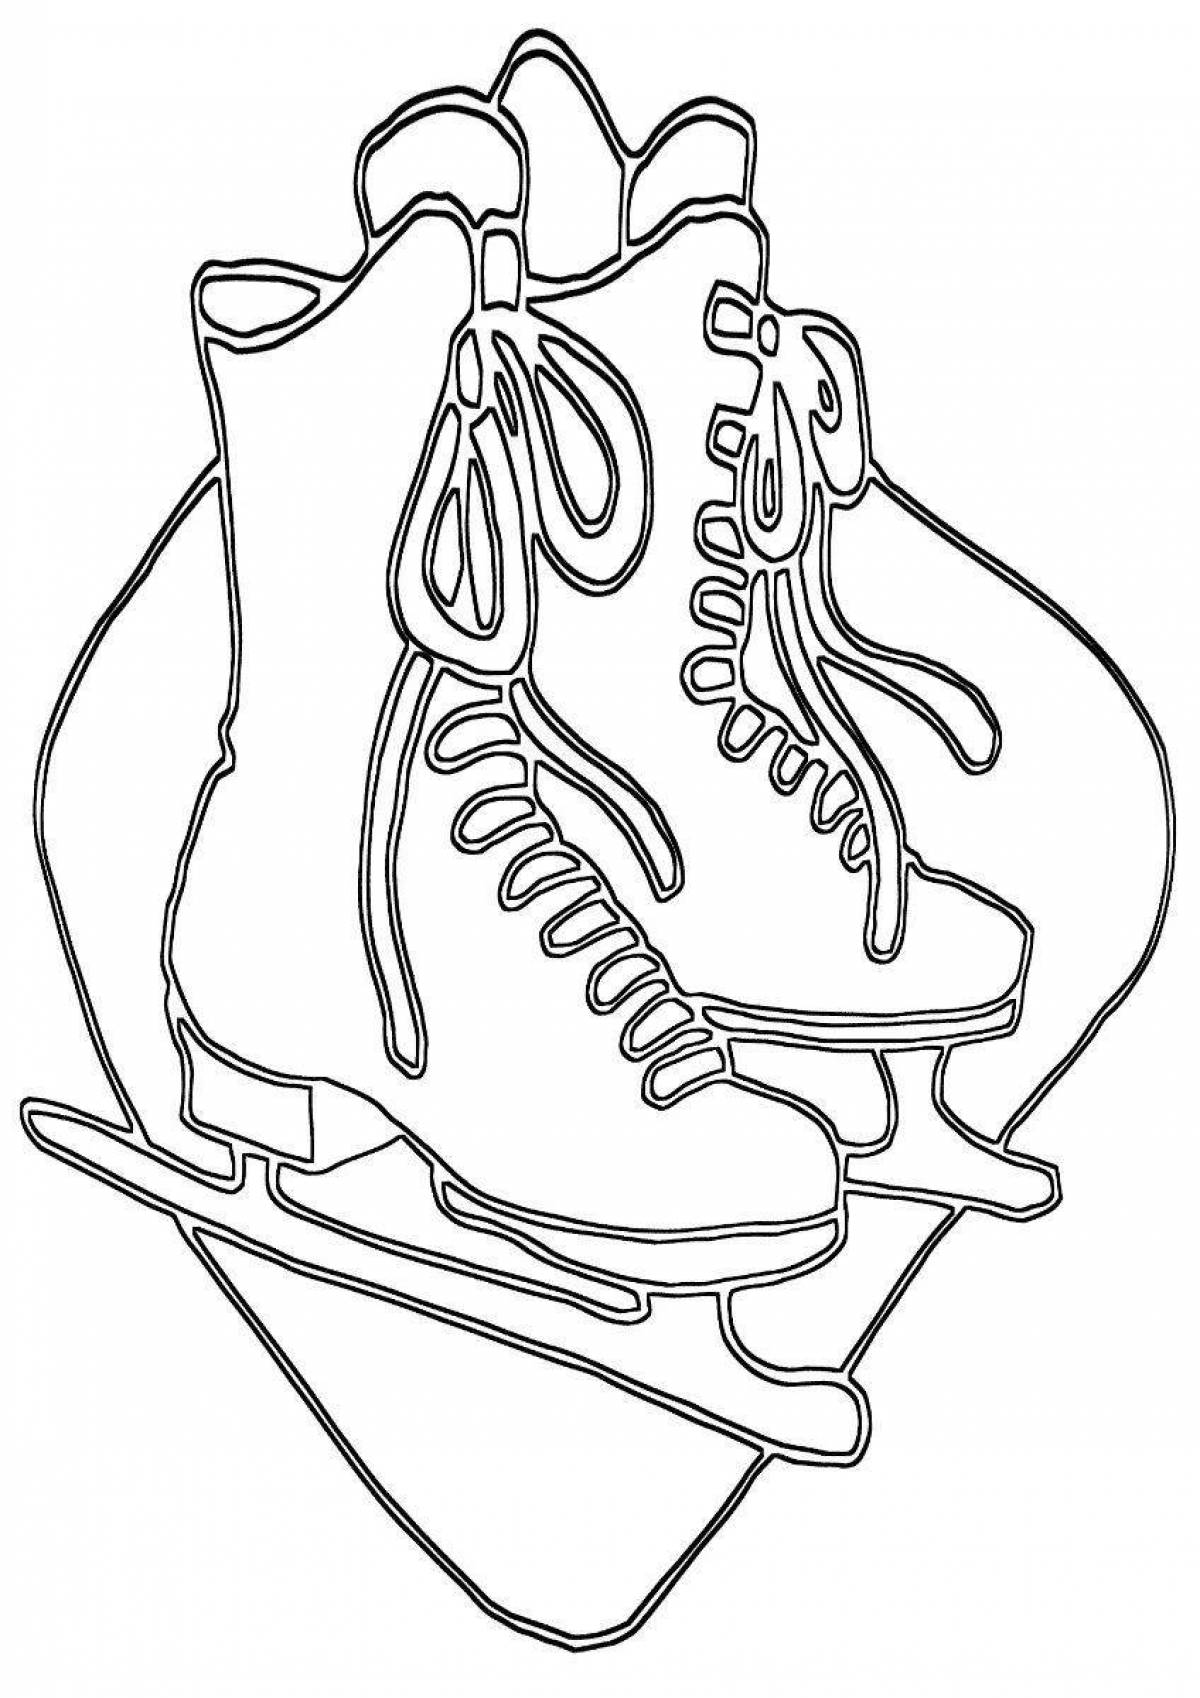 Coloring figure skates with bright colors